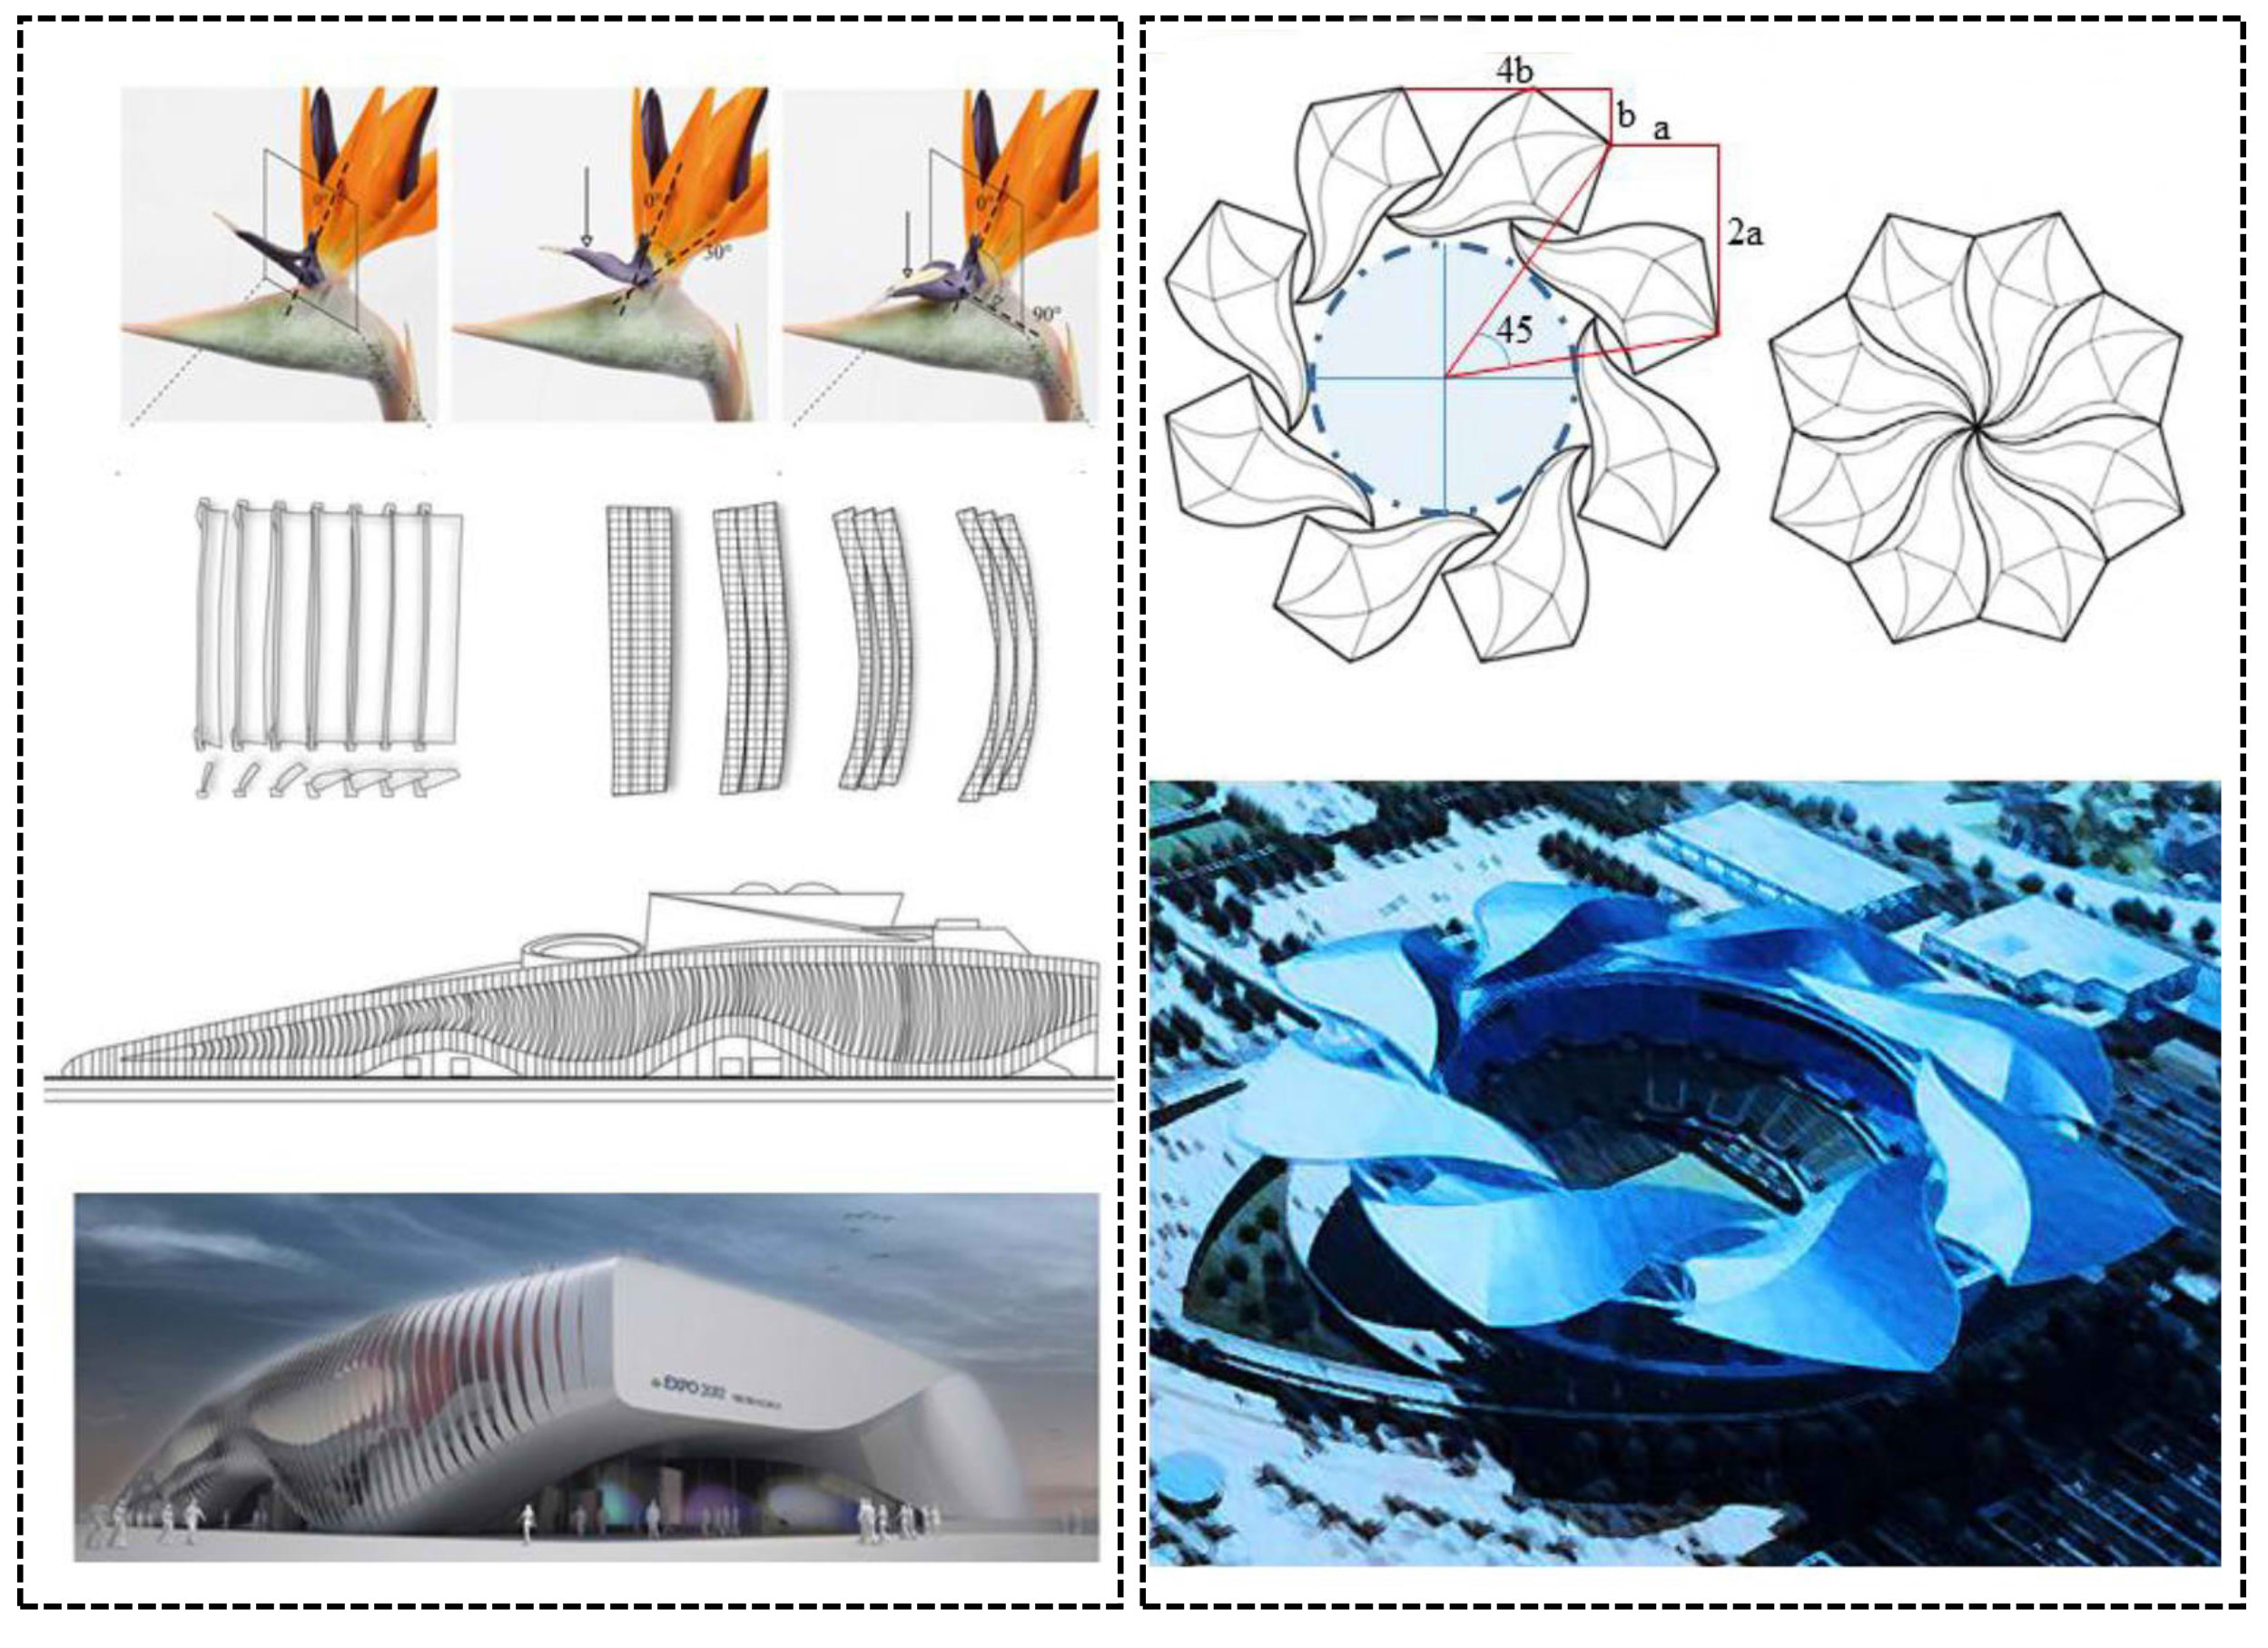 (a) Thematic pavilion with kinematic facade at Expo 2012 in Yeosu Korea and (b) Shanghai Qizhang Forest Sports City Centre with dynamic retractable roof in Minhang District of Shanghai in China [4].